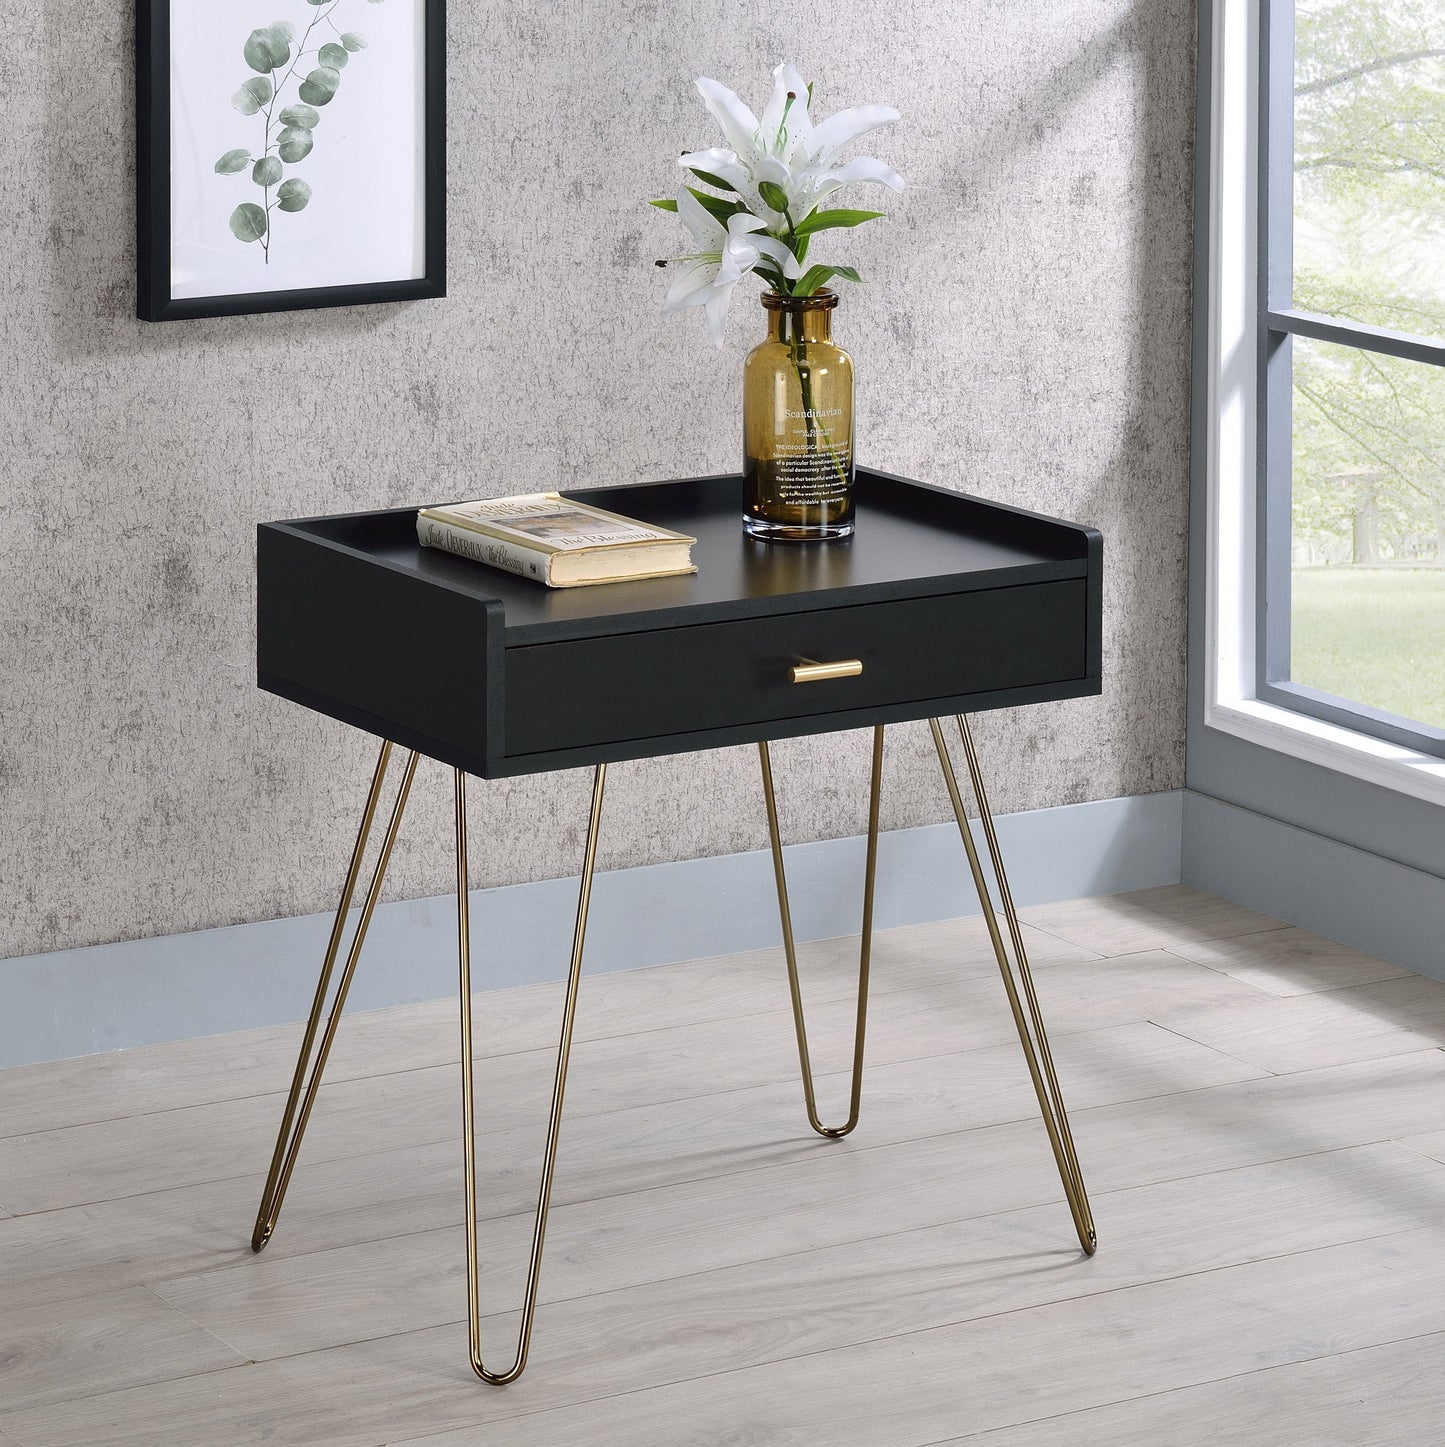 Hailey Black and Gold Wood Storage End Table